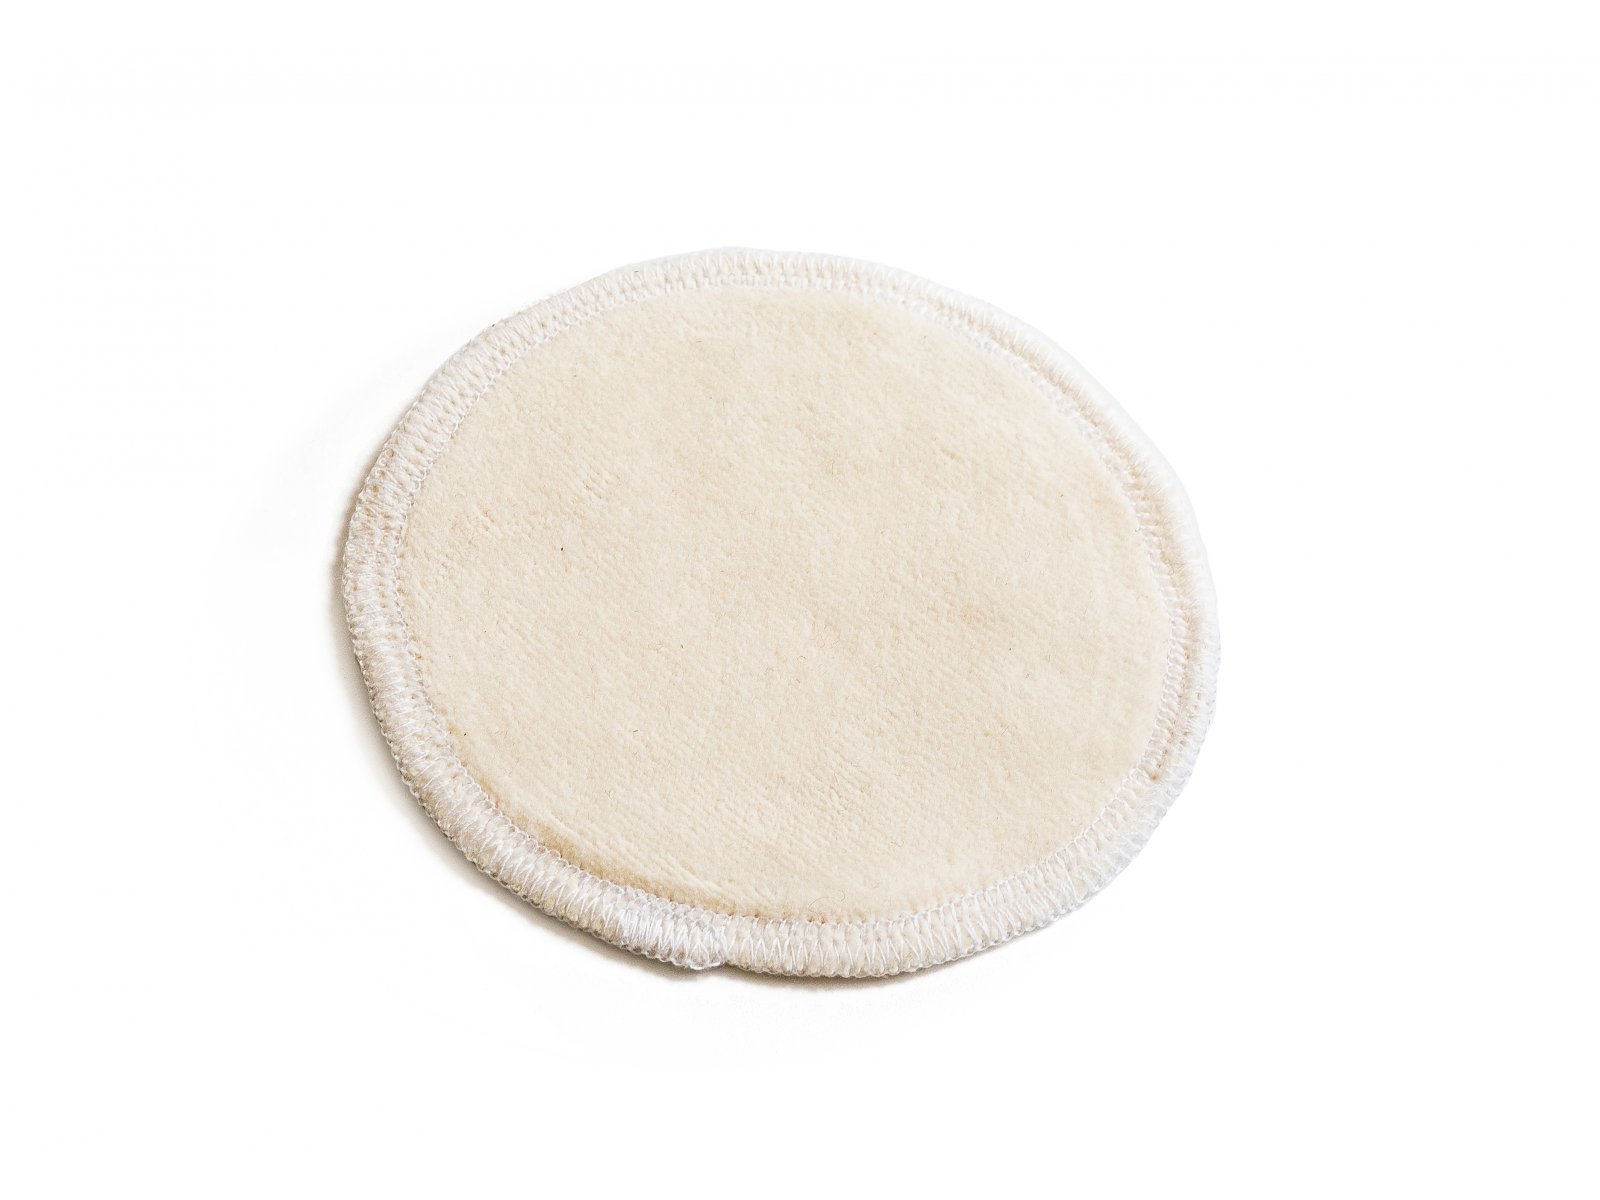 Cotton Face cloth Basic - Exfoliating and cleansing cotton face cloth - 2